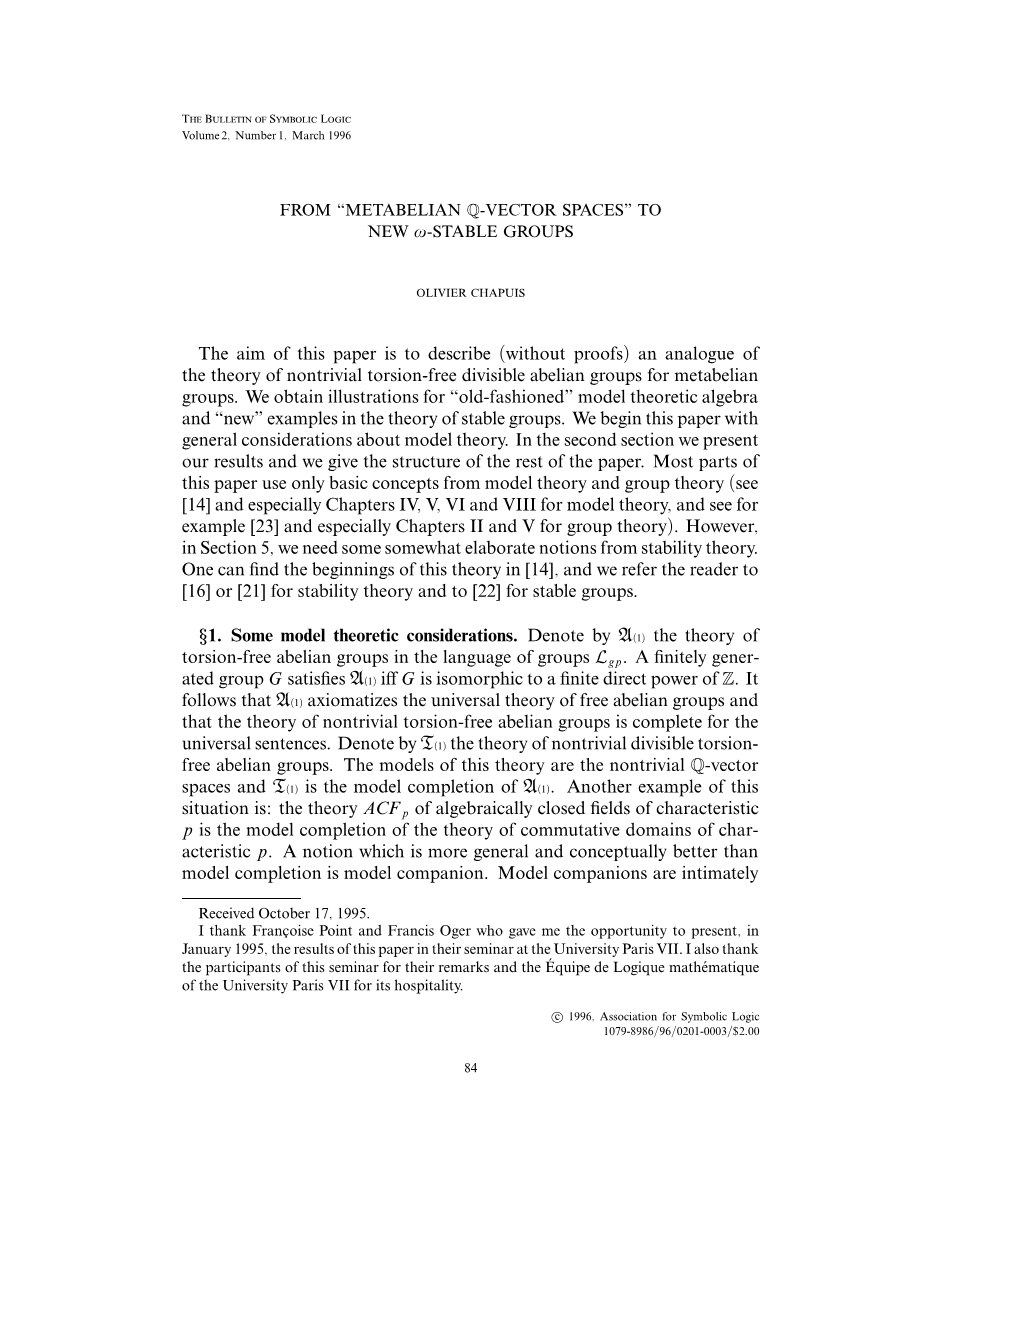 (Without Proofs) an Analogue of the Theory of Nontrivial Torsion-Free Divisible Abelian Groups for Metabelian Groups